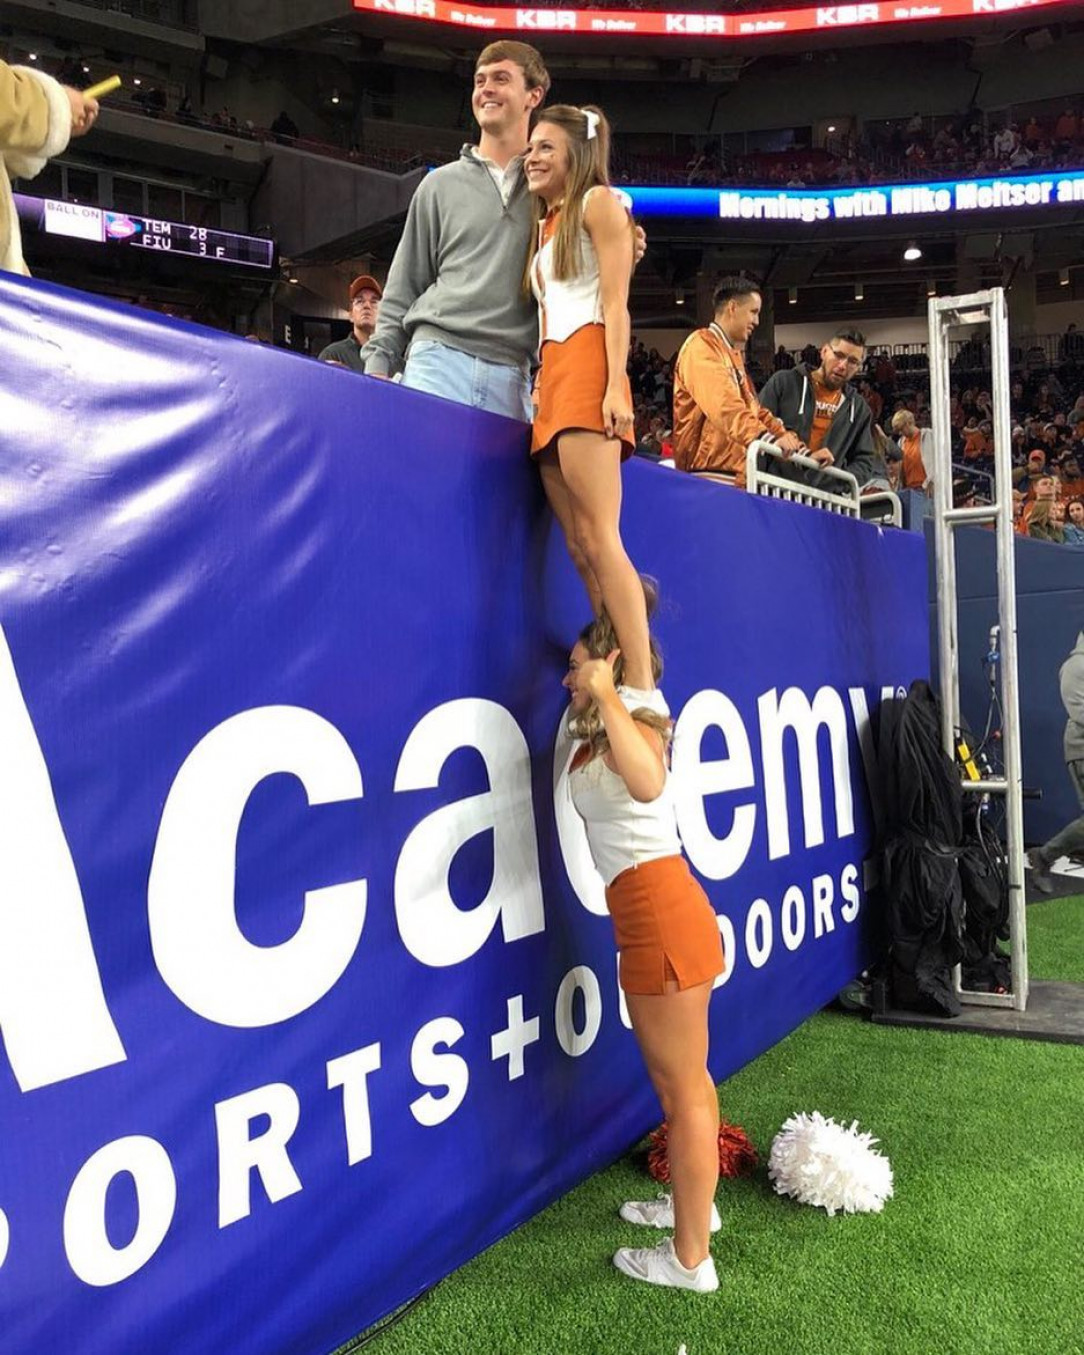 Cheerleader helping a friend out for a picture with a fan